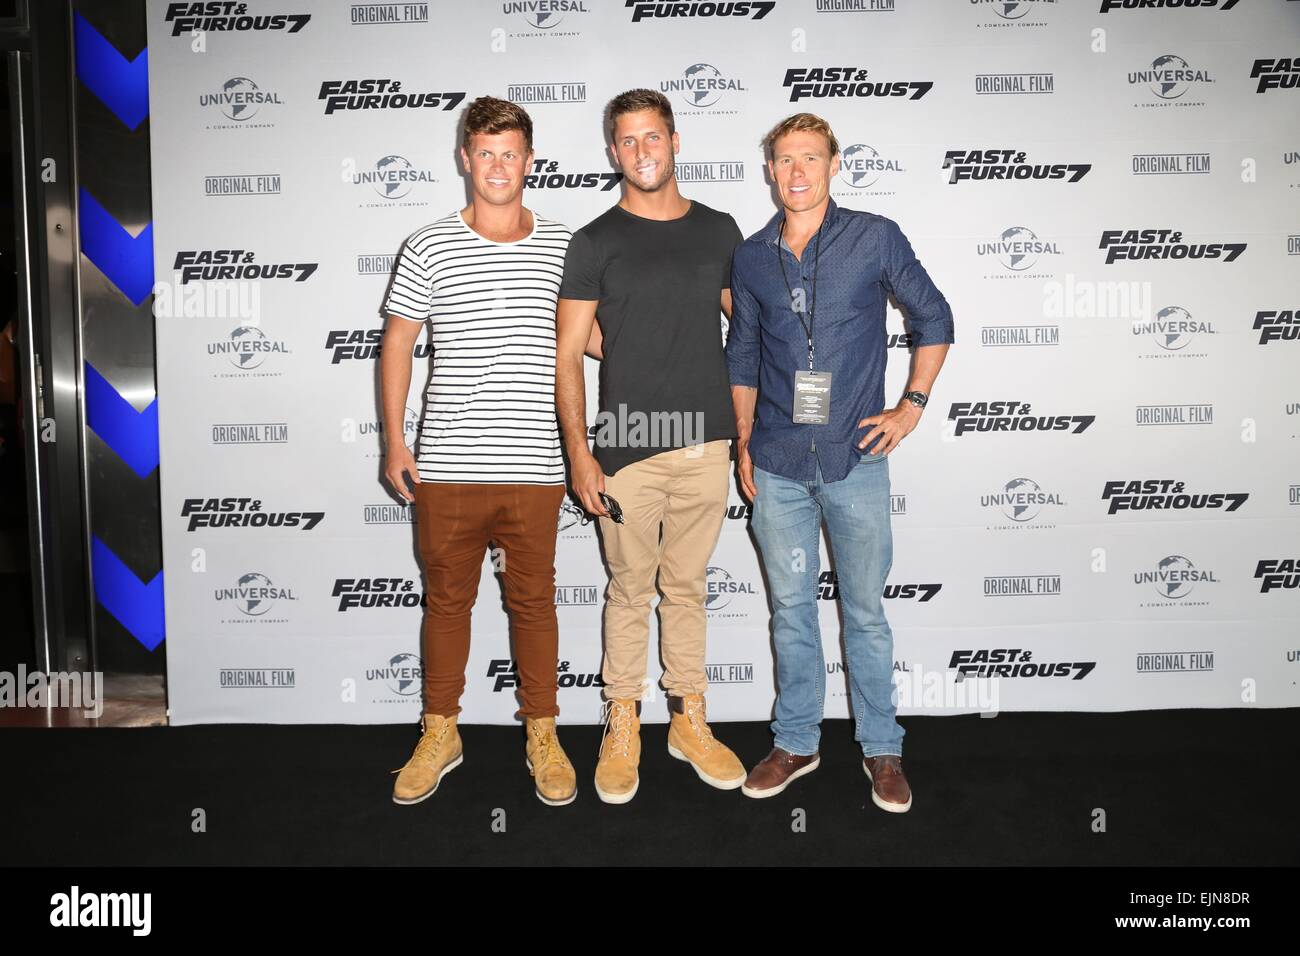 Sydney, Australia. 30 March 2015. Celebrities arrived on the red carpet for the Sydney Premiere of Fast and Furious 7, in conjunction with Triple M radio, held at Hoyts Entertainment Quarter. Pictured are Bondi Rescue Lifeguards, L-R: Harrison Reid, tbc and tbc. Credit:  Richard Milnes/Alamy Live News Stock Photo